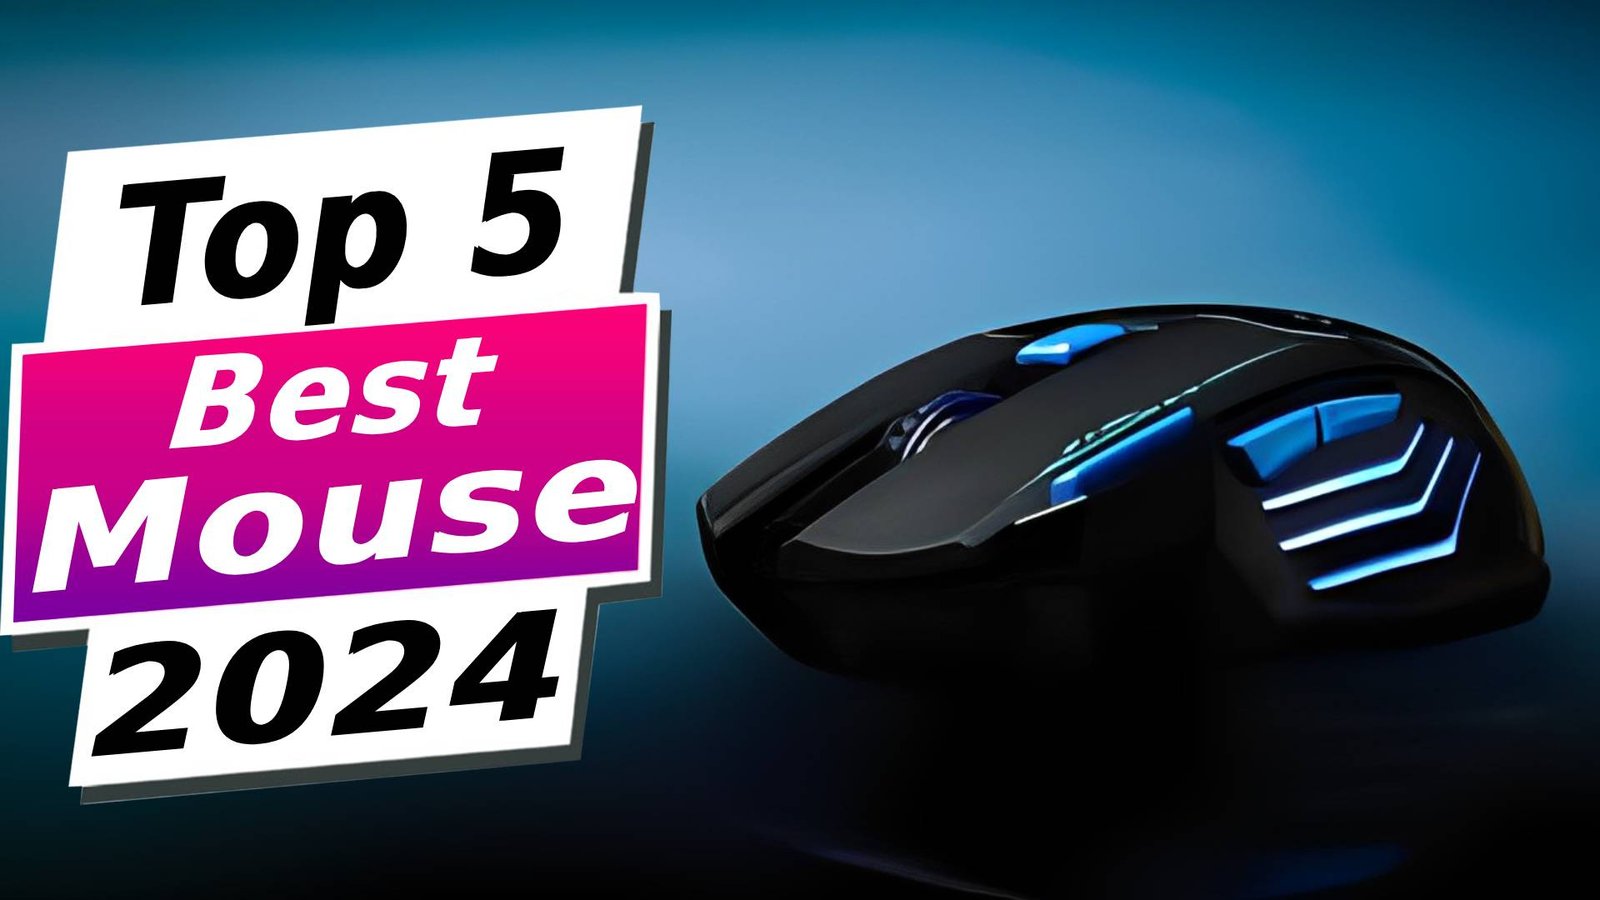 Top 5 Best Mouse